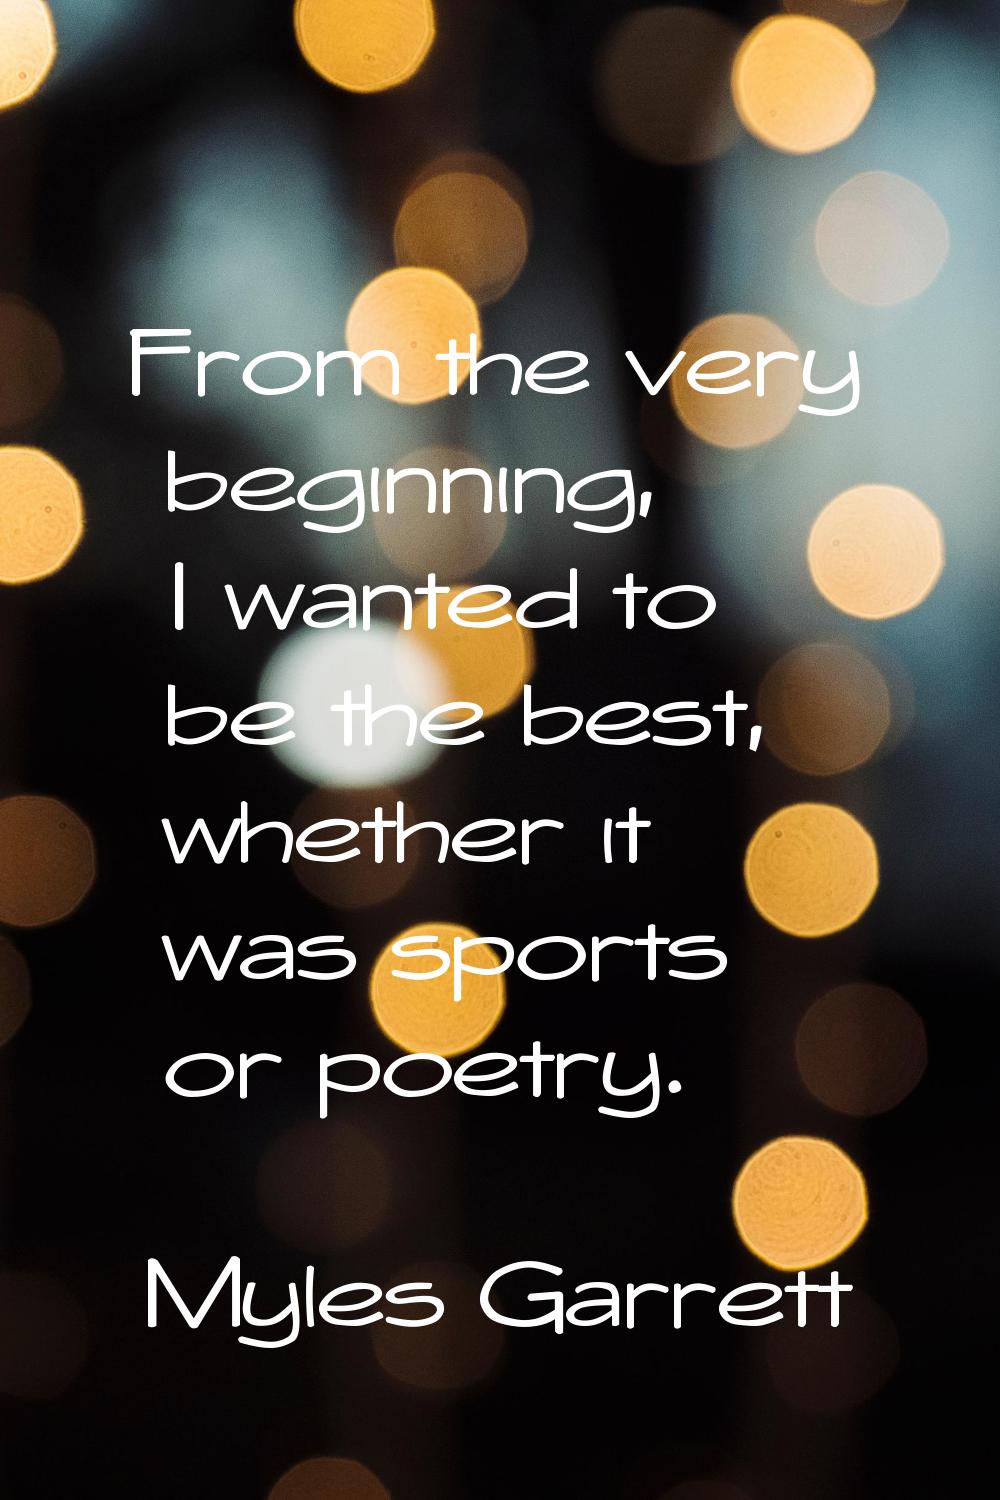 From the very beginning, I wanted to be the best, whether it was sports or poetry.